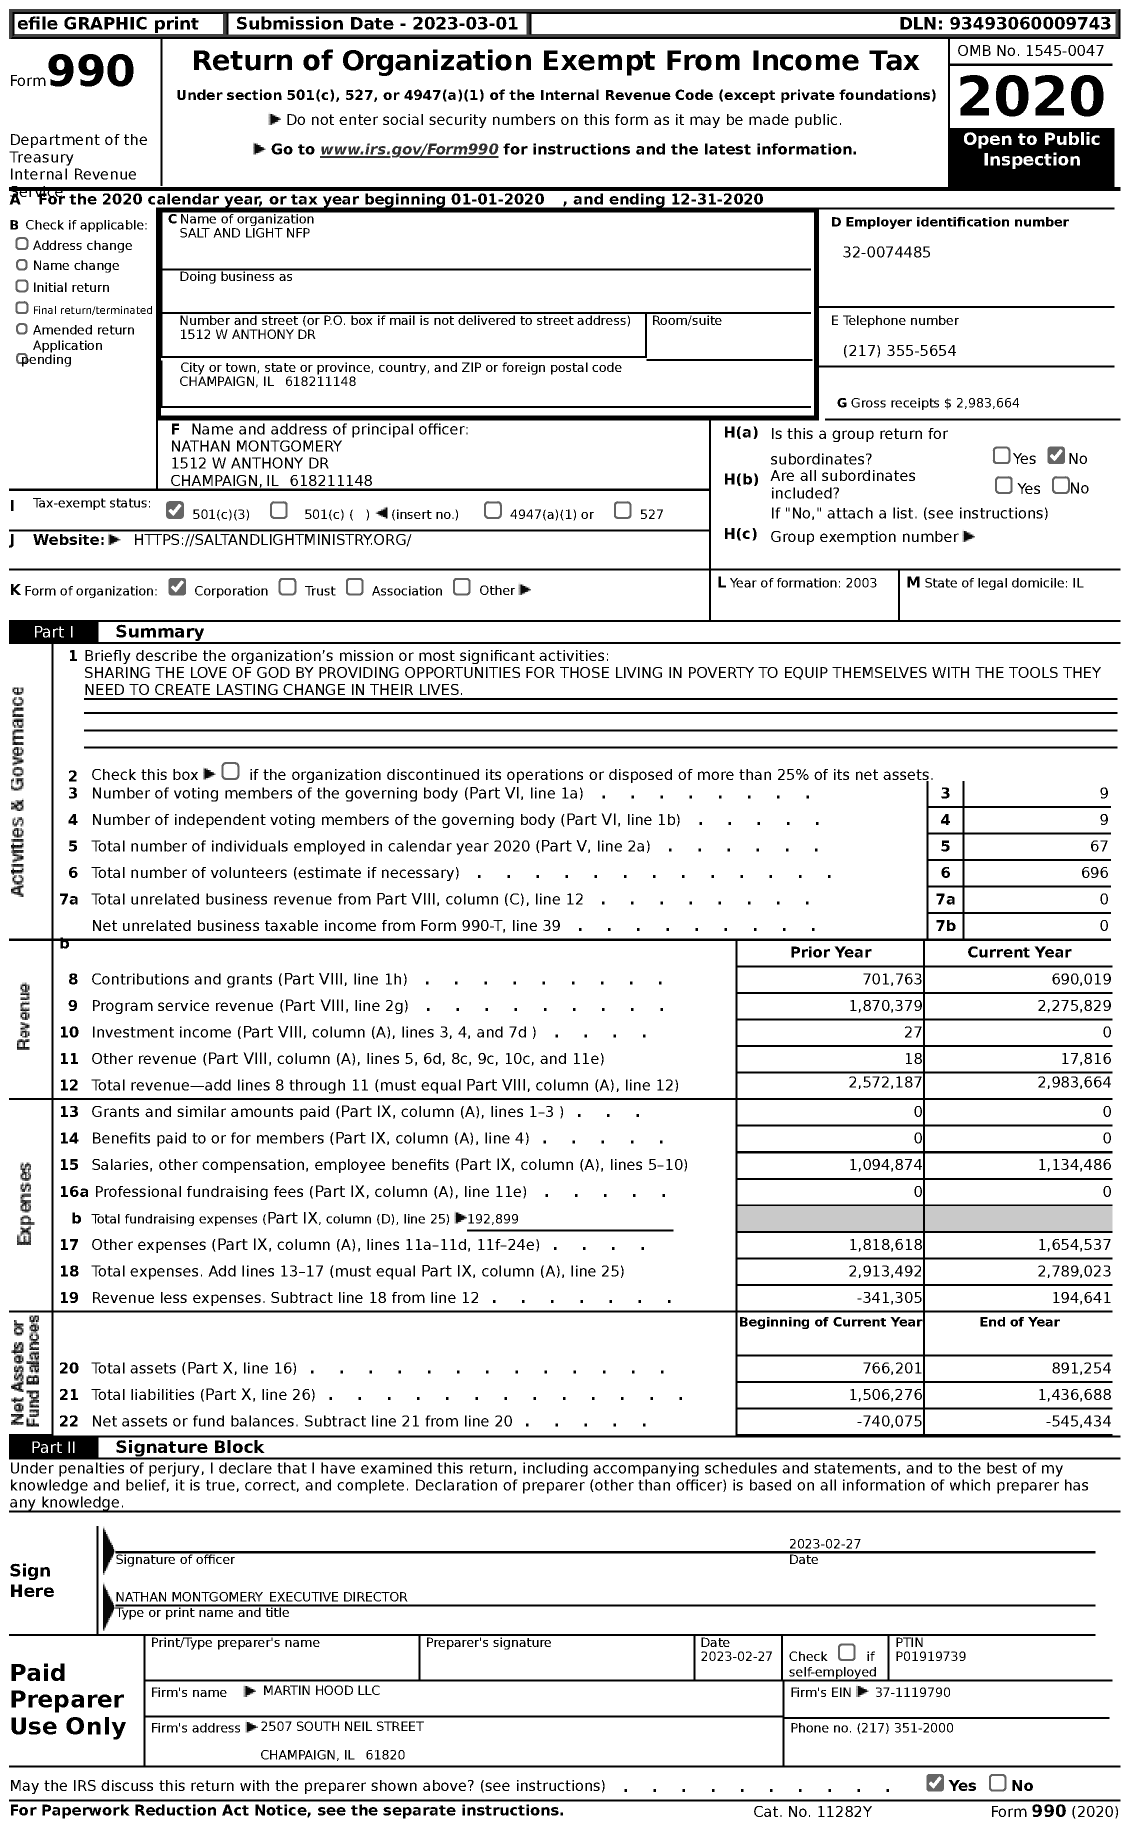 Image of first page of 2020 Form 990 for Salt and Light NFP